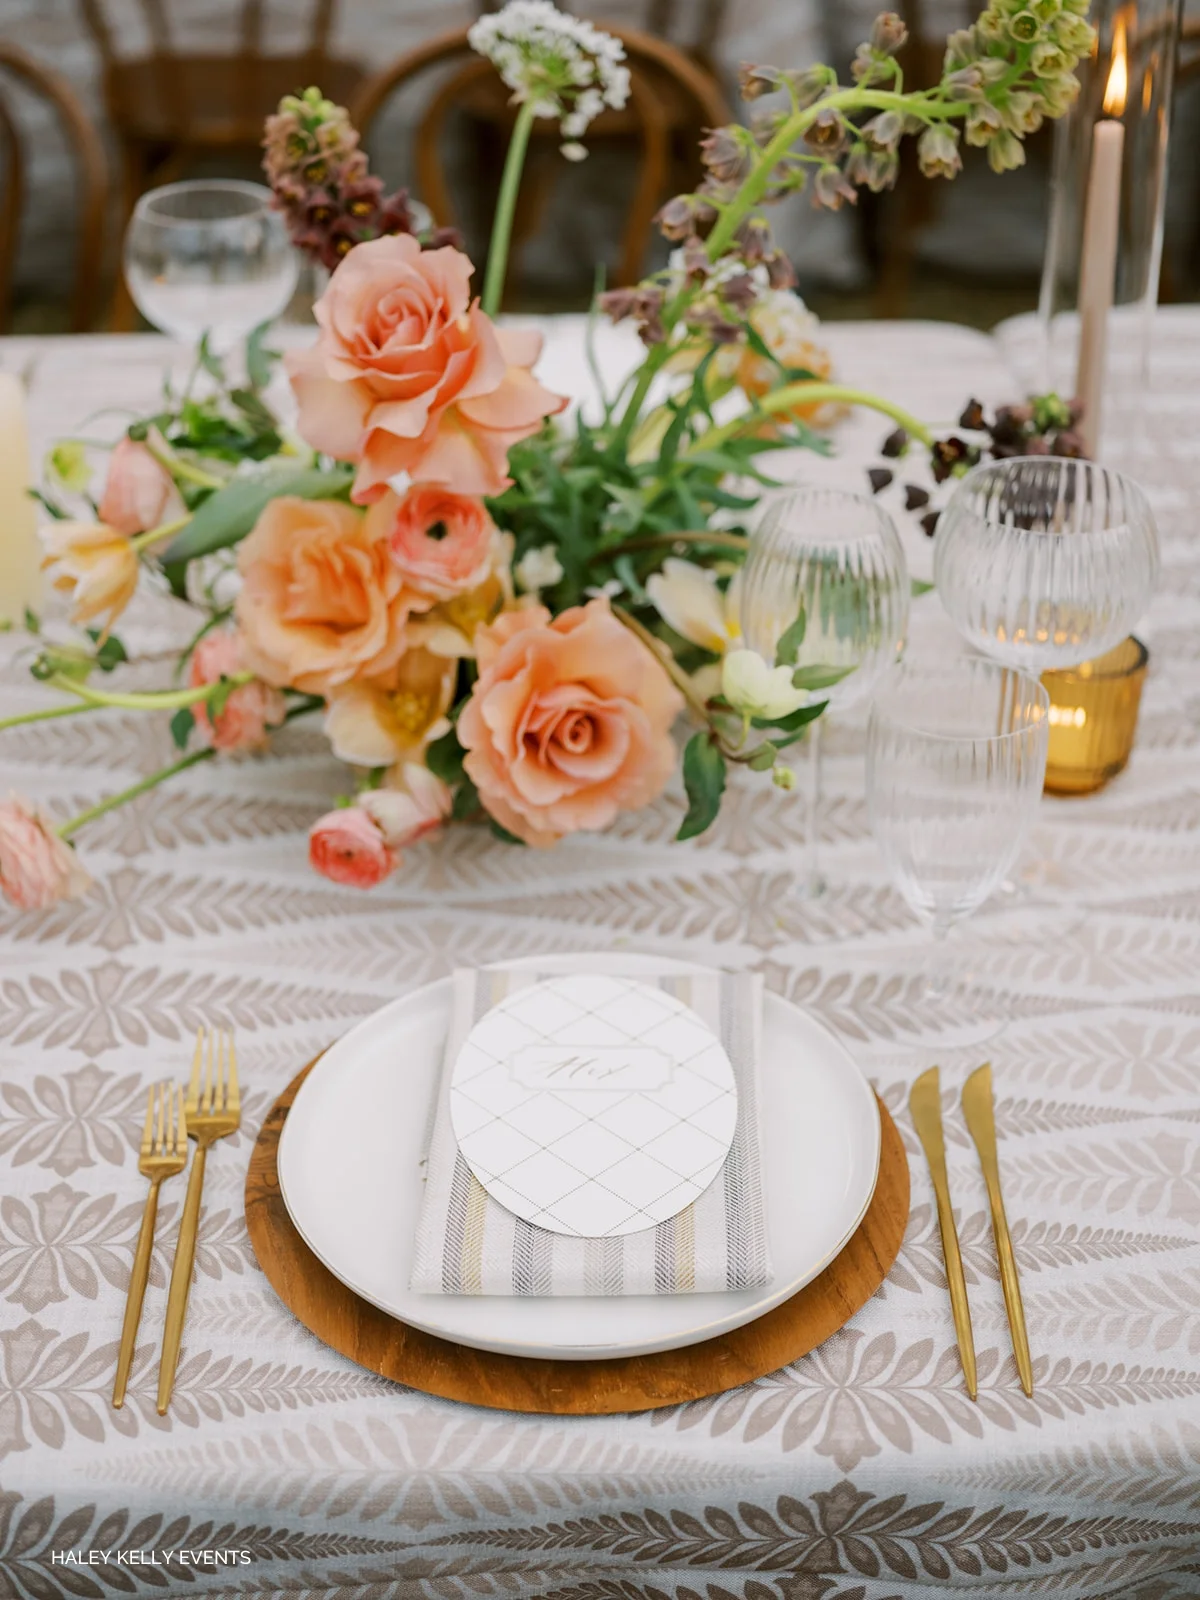 Elegant dining table setting featuring coral roses centerpiece, white plates, gold cutlery, and patterned tablecloth.